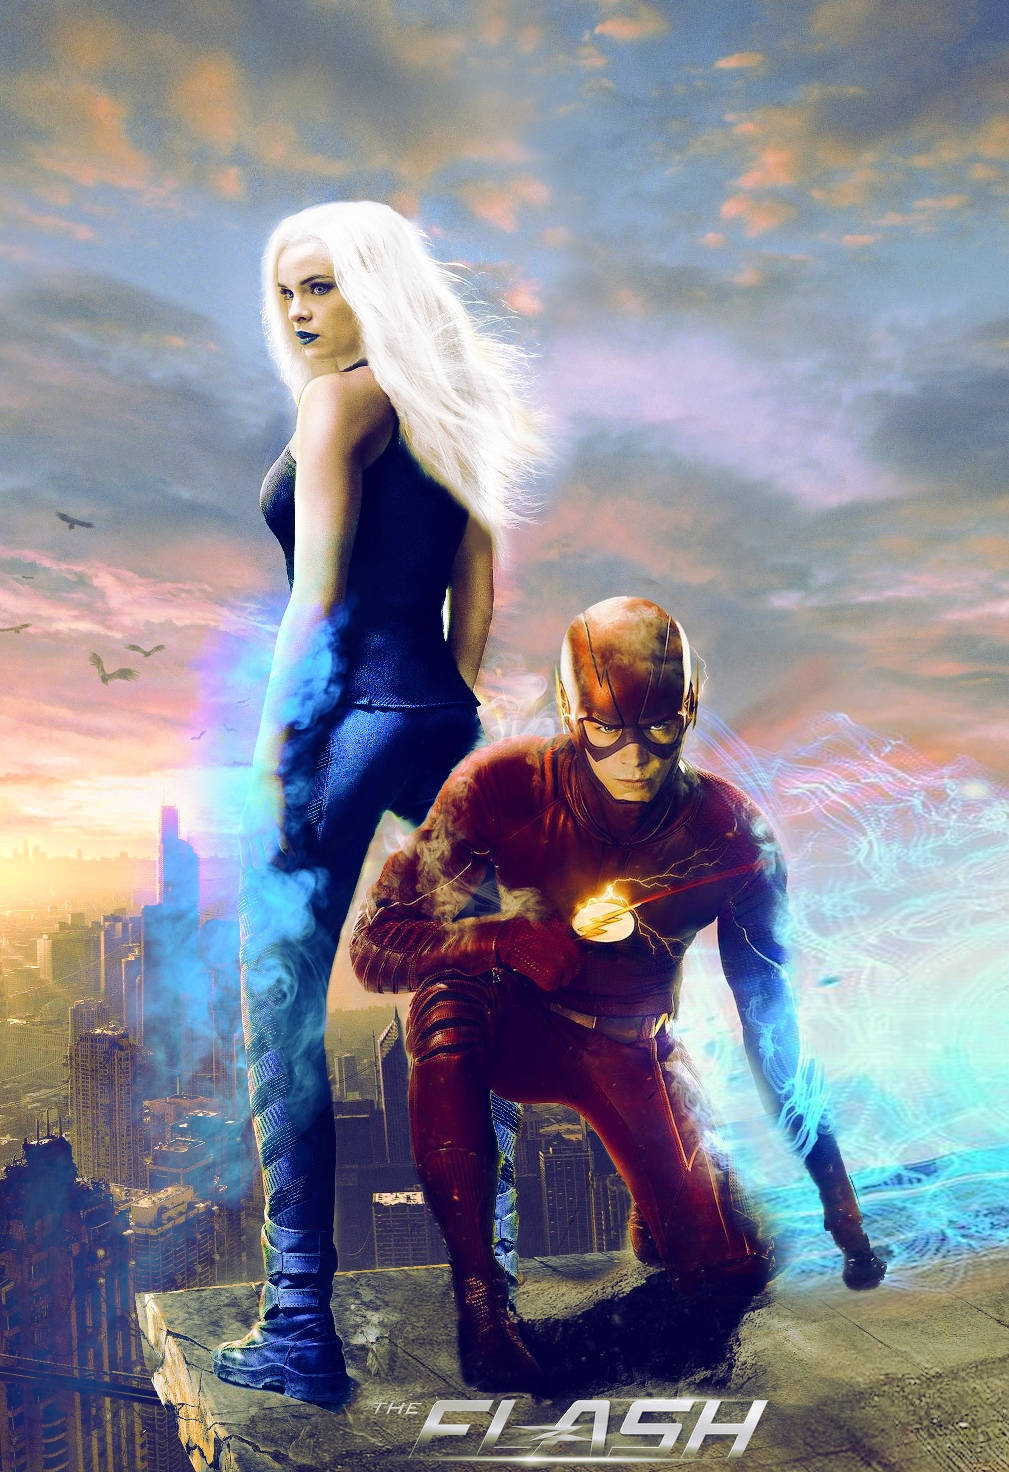 Killer Frost And The Flash Poster Wallpaper